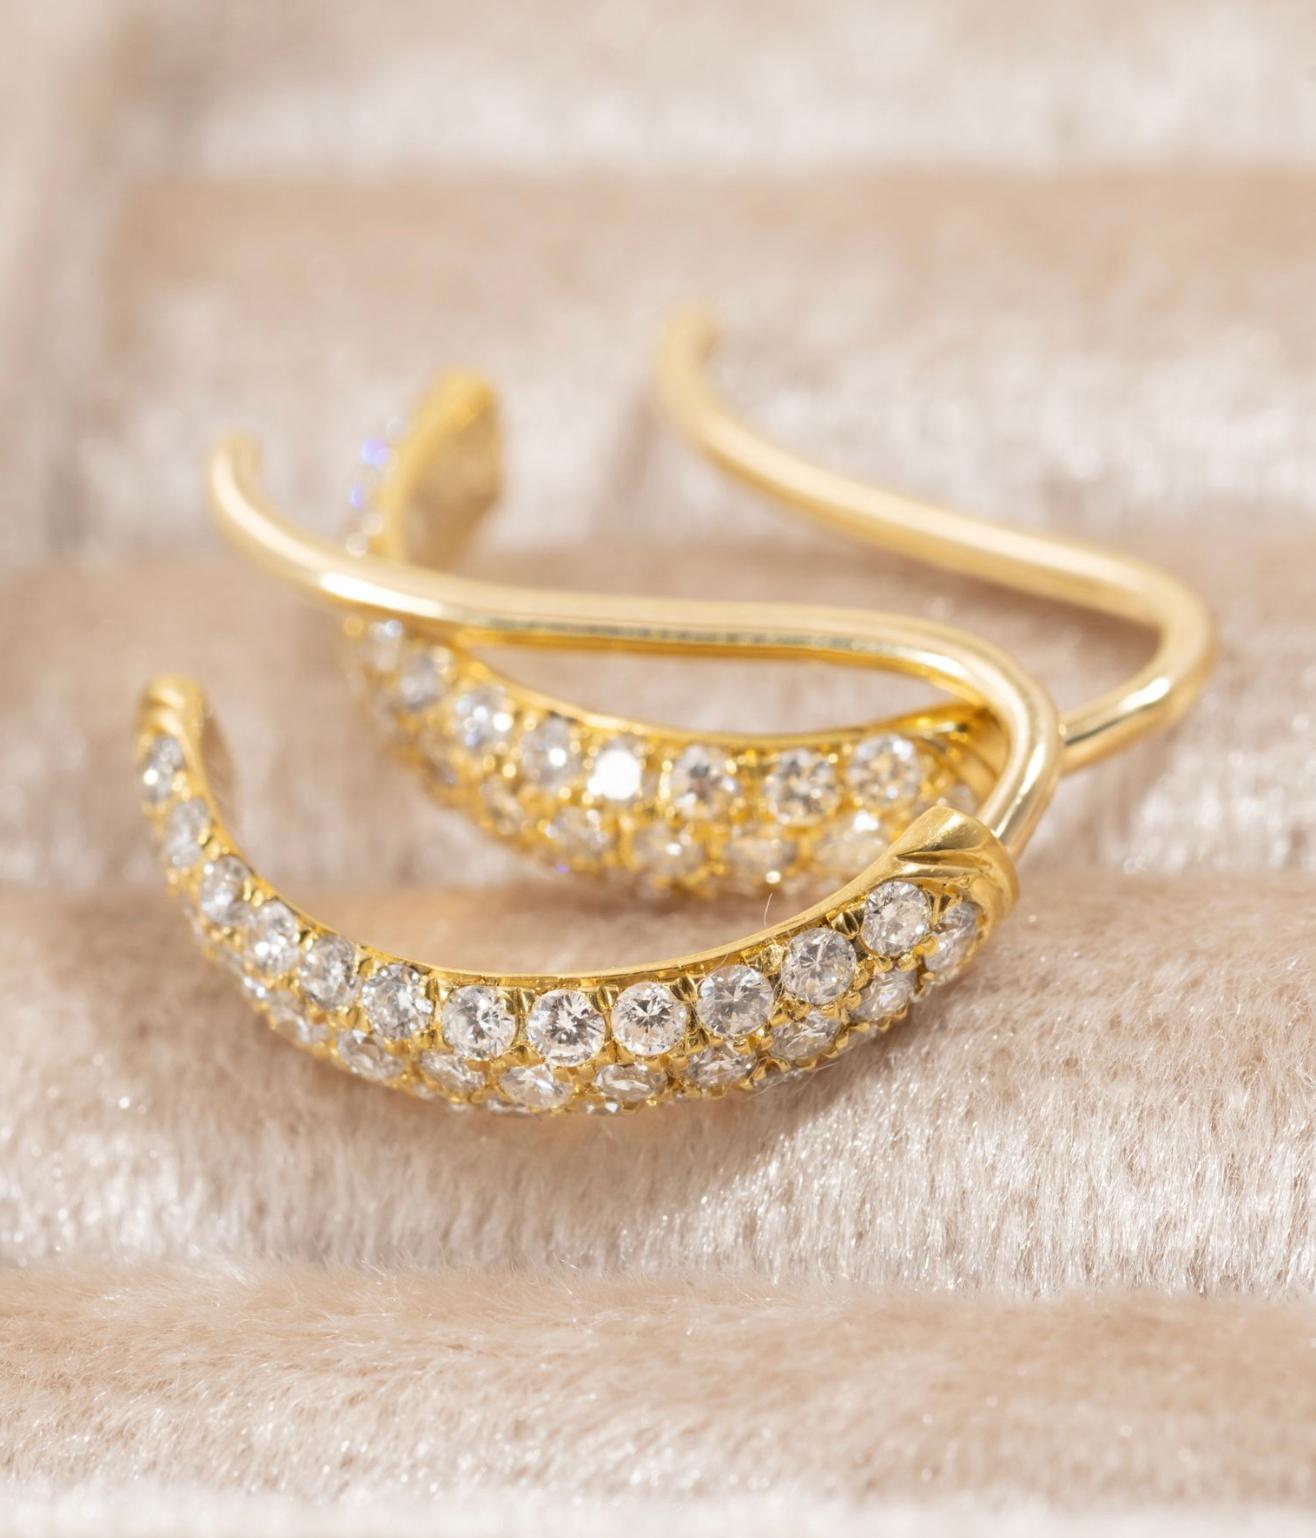 Paris & Lily, one-of-a-kind , 22K gold, handmade, half-round, pave diamond hoop earrings on 18K gold ear wires.  These statement earrings hang approximately 18.7mm from the ear (.73 inch). The brilliant cut diamonds are SI1 quality and between the 2